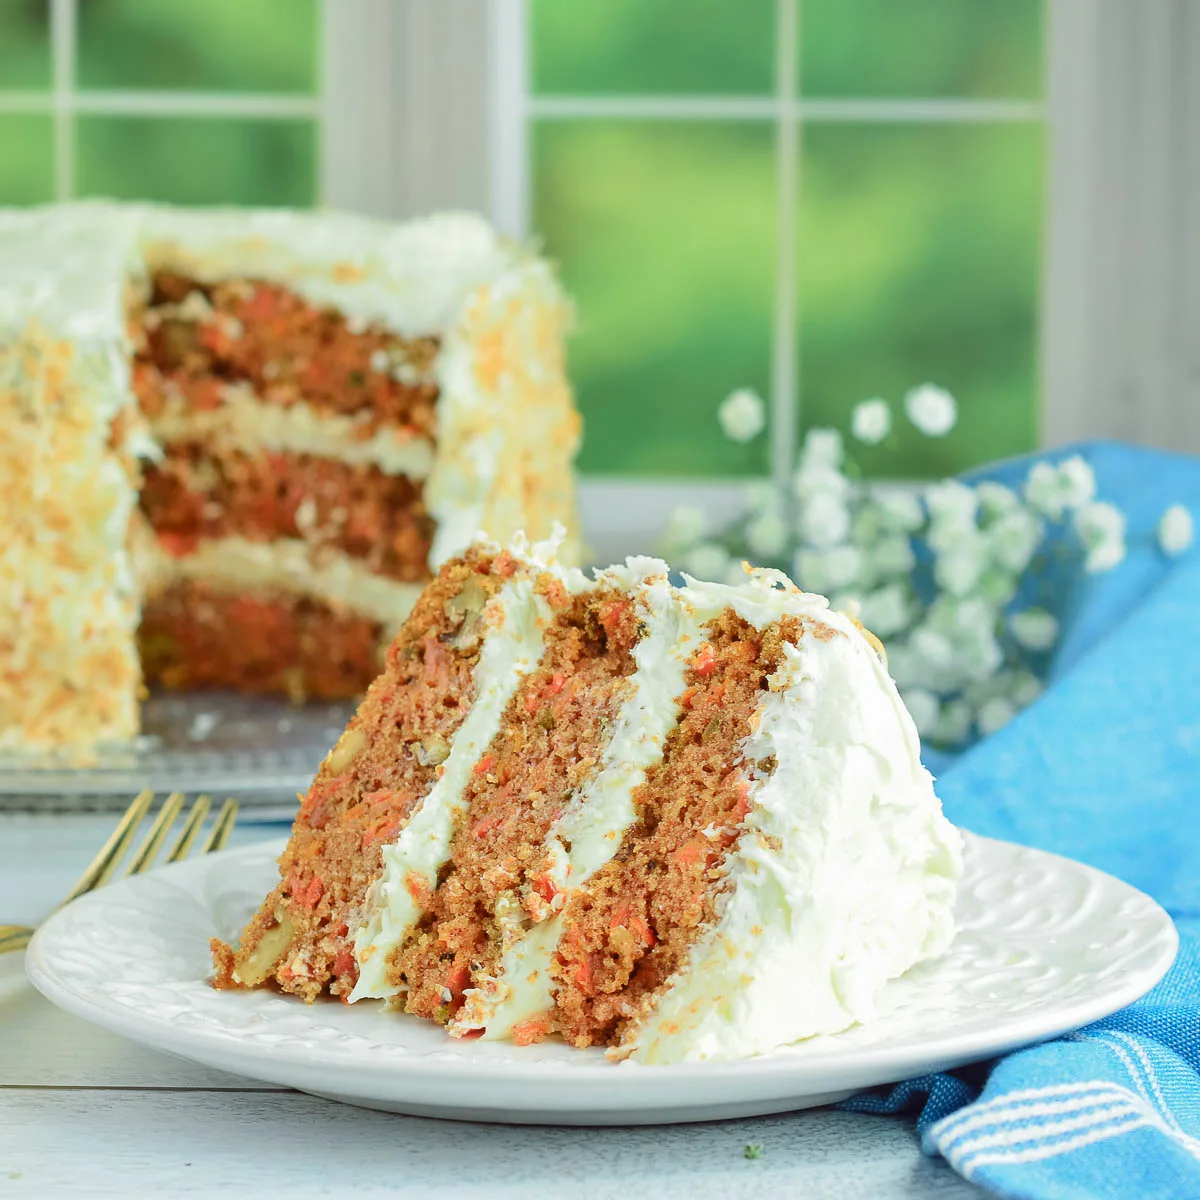 Deluxe Carrot Cake with Coconut Cream Cheese Frosting